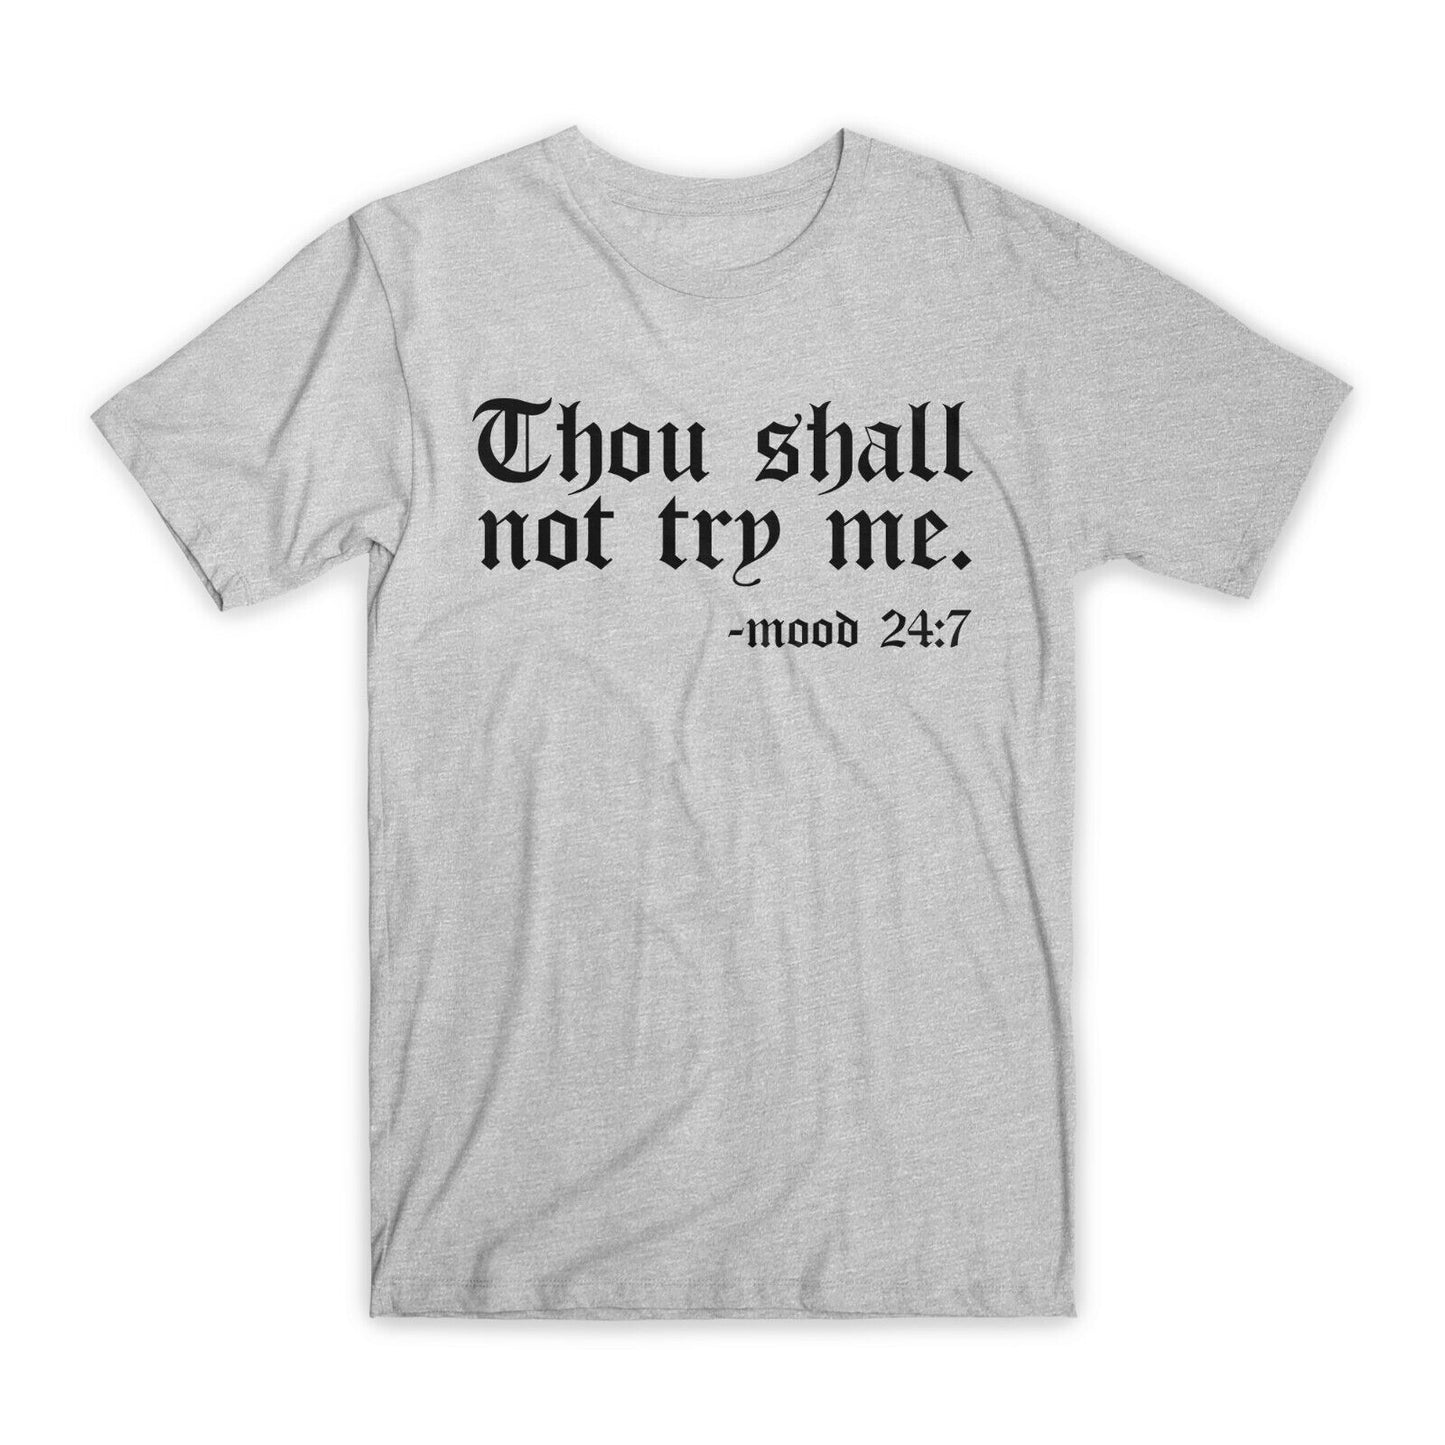 Thou Shall Not Try Me T-Shirt Premium Soft Cotton Crew Neck Funny Tees Gifts NEW